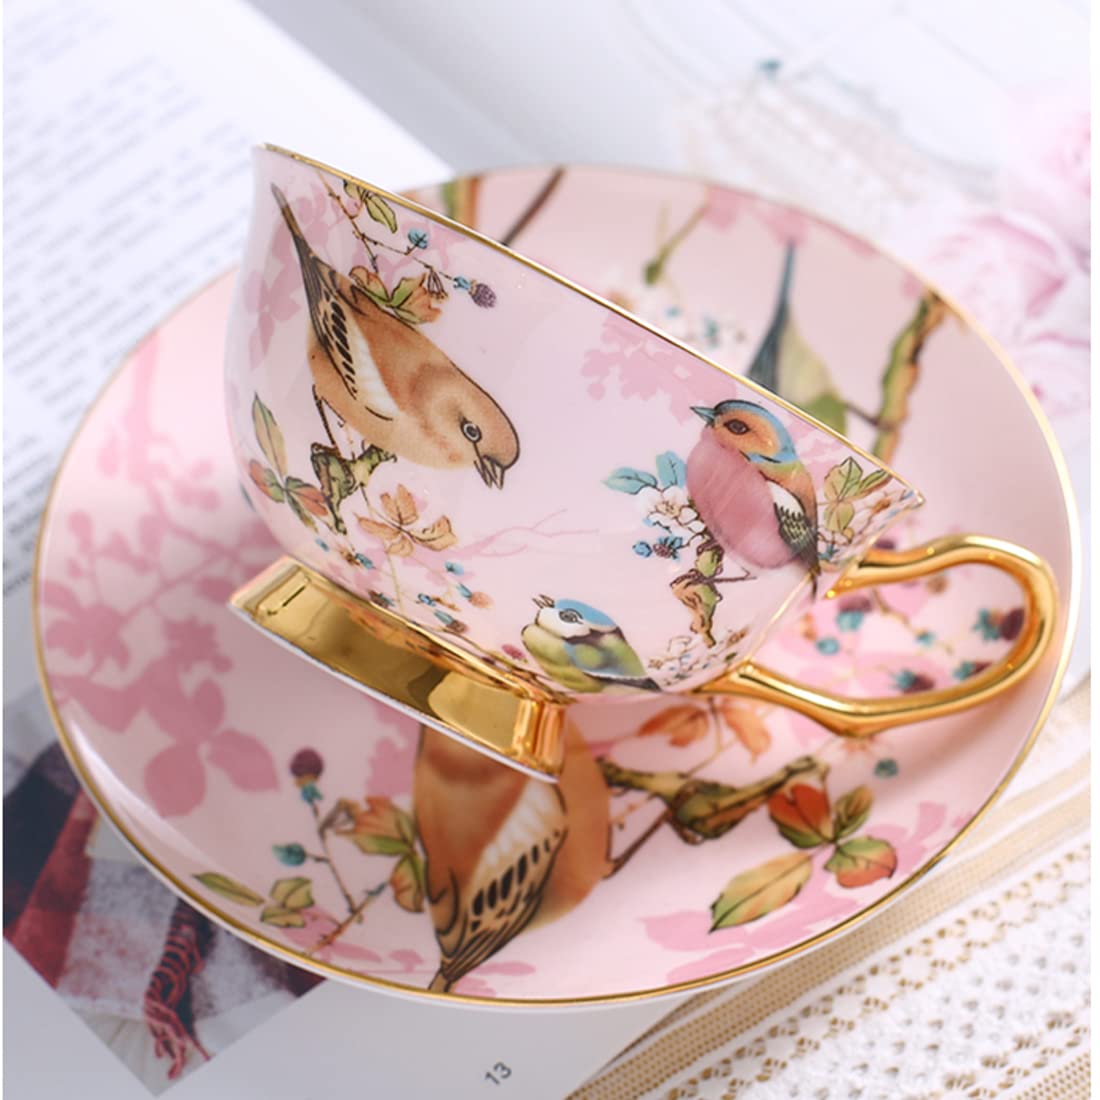 Pfedxoon Pink Bird Tea Cup with Saucer Spoon 3 Piece Set（7oz） Cappuccino Cups, Coffee Cups, Tea Cup Set, British Coffee Cups, Porcelain Tea Set, Latte Cups, Mother's Day Gift